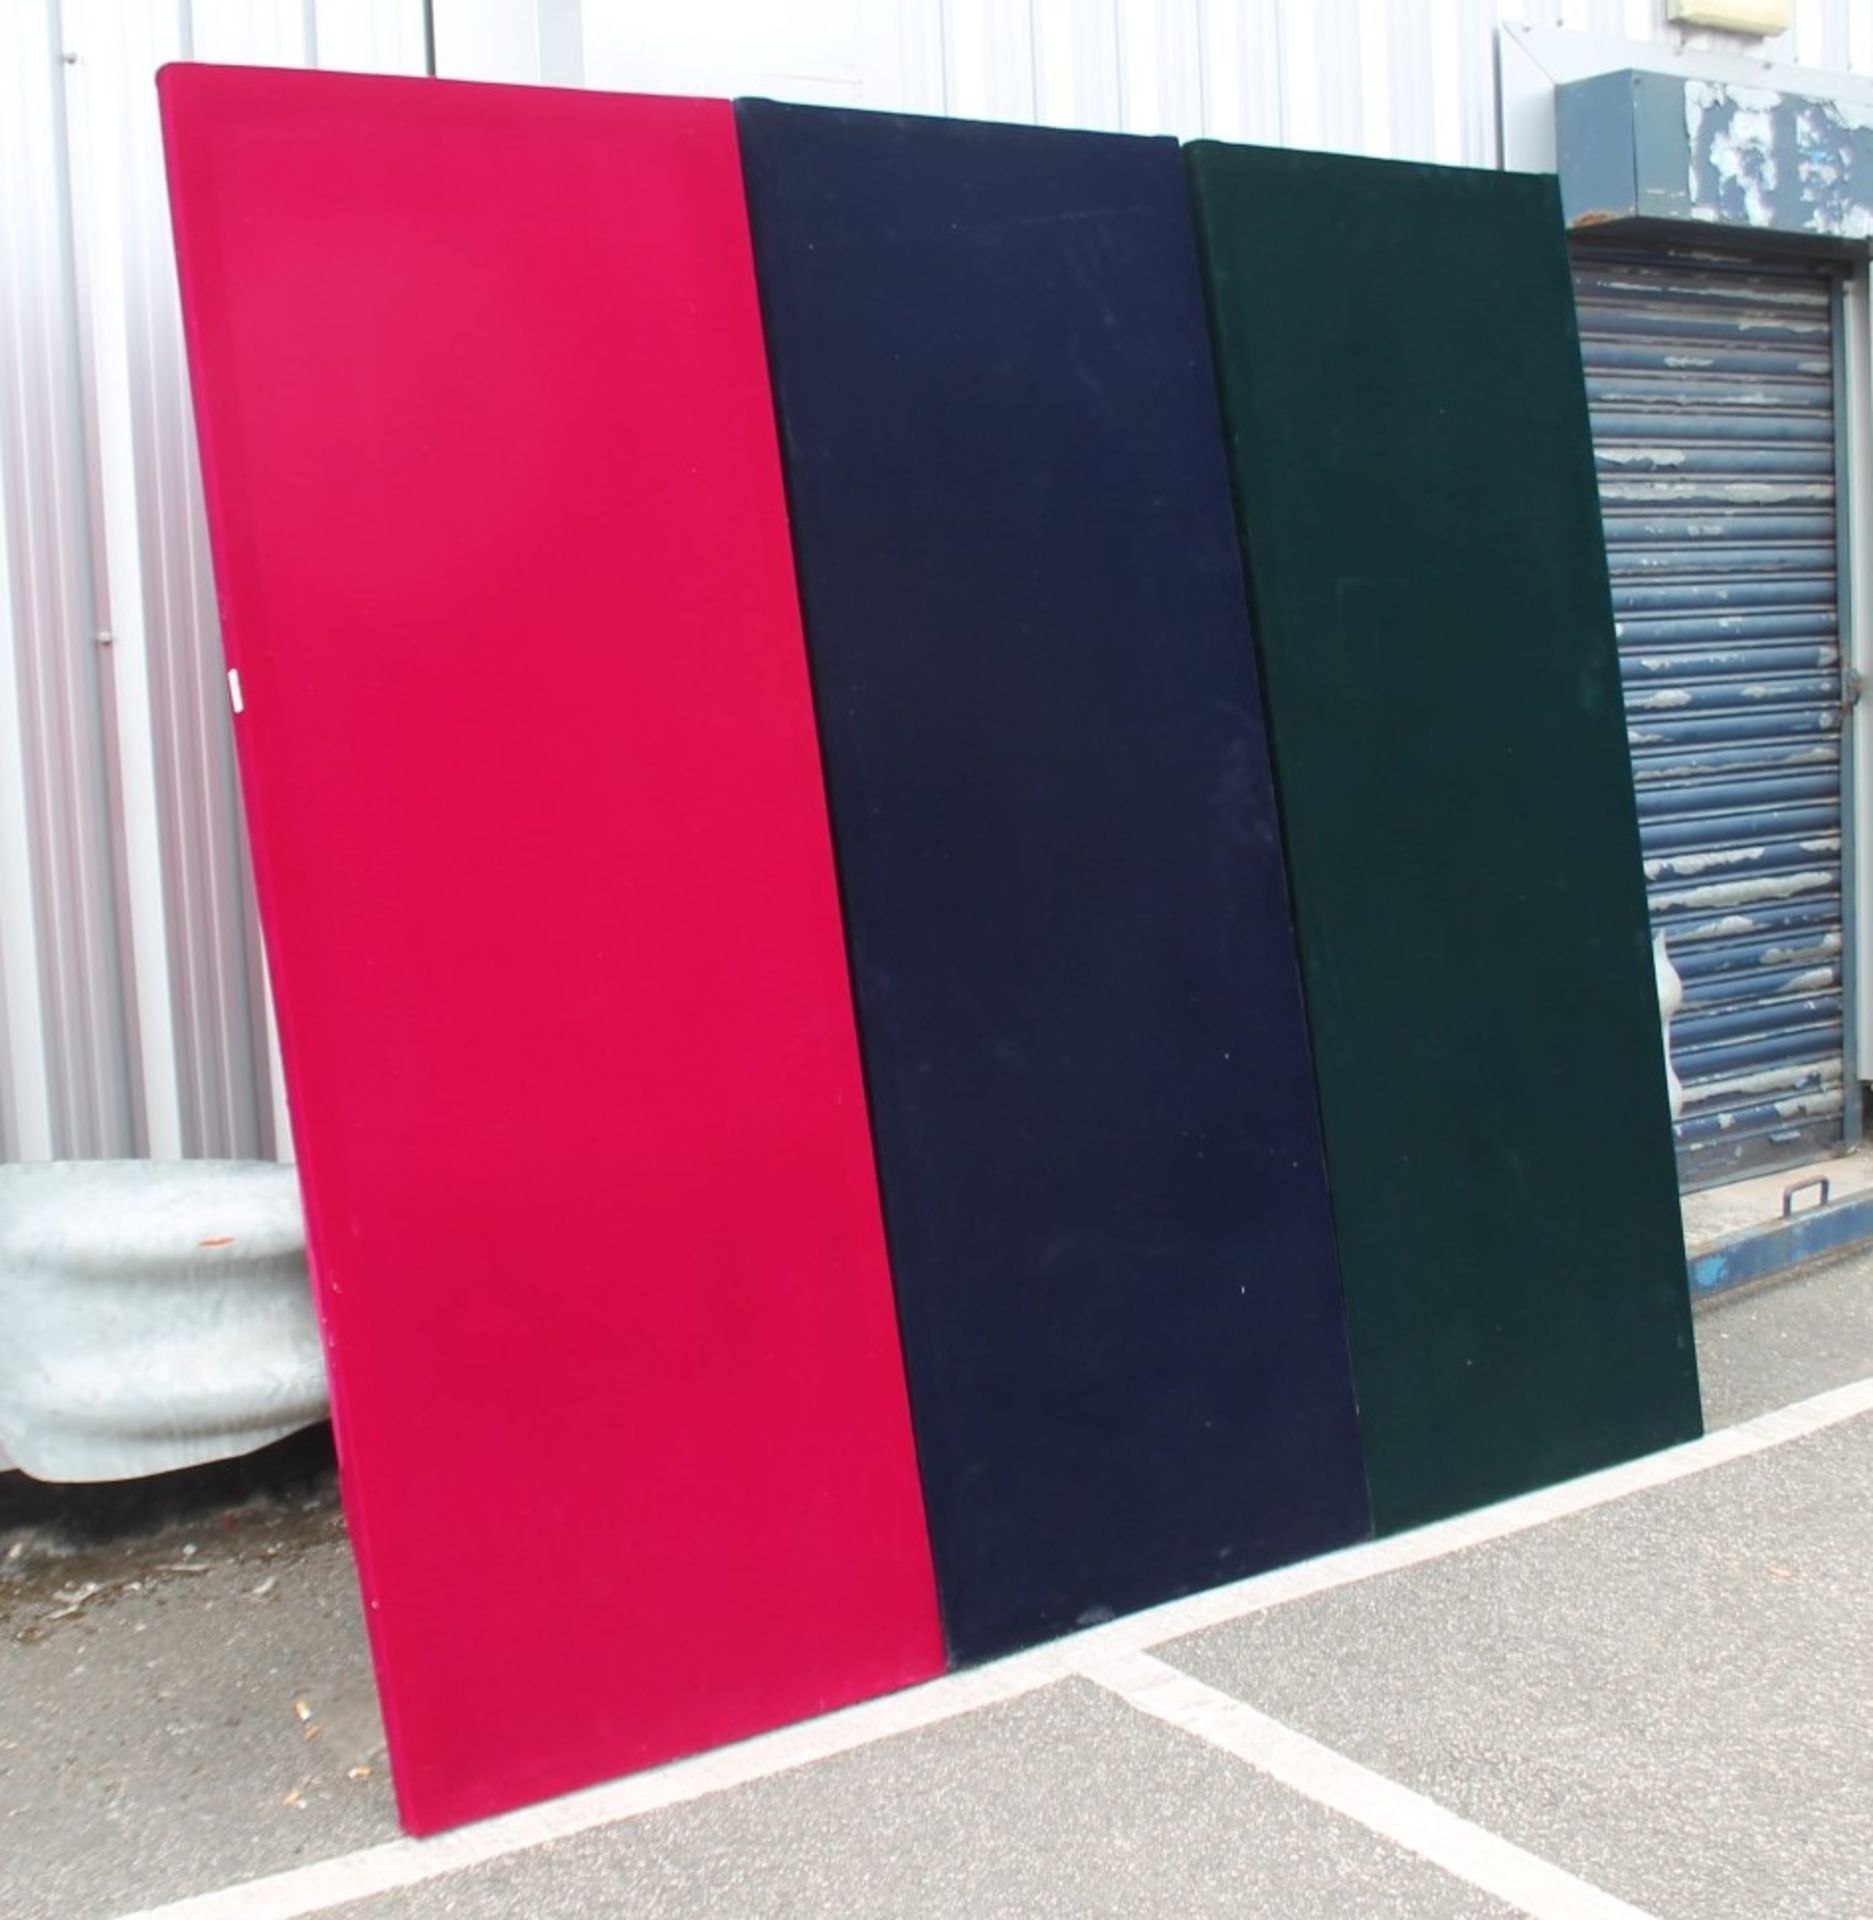 3 x Premium Velvet Upholstered Timber Framed Shop Display Panels - Dimensions (approx): H215 x W80cm - Image 4 of 4